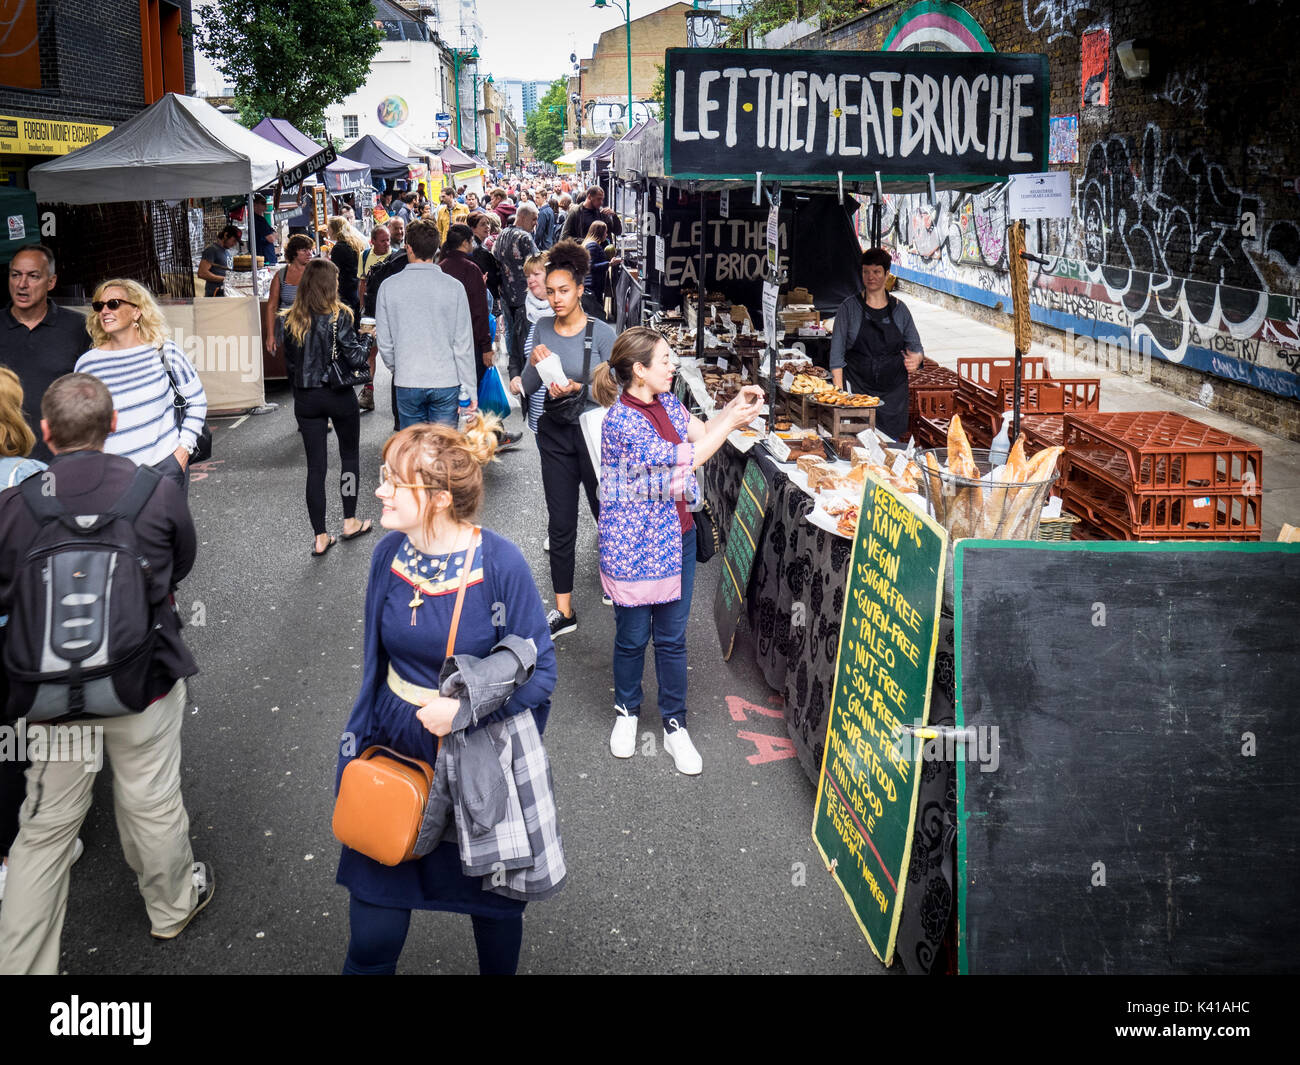 Brick Lane Sunday Food Market - tourists & locals browse the street food stalls in Brick Lane in London's East End on a Sunday morning Stock Photo